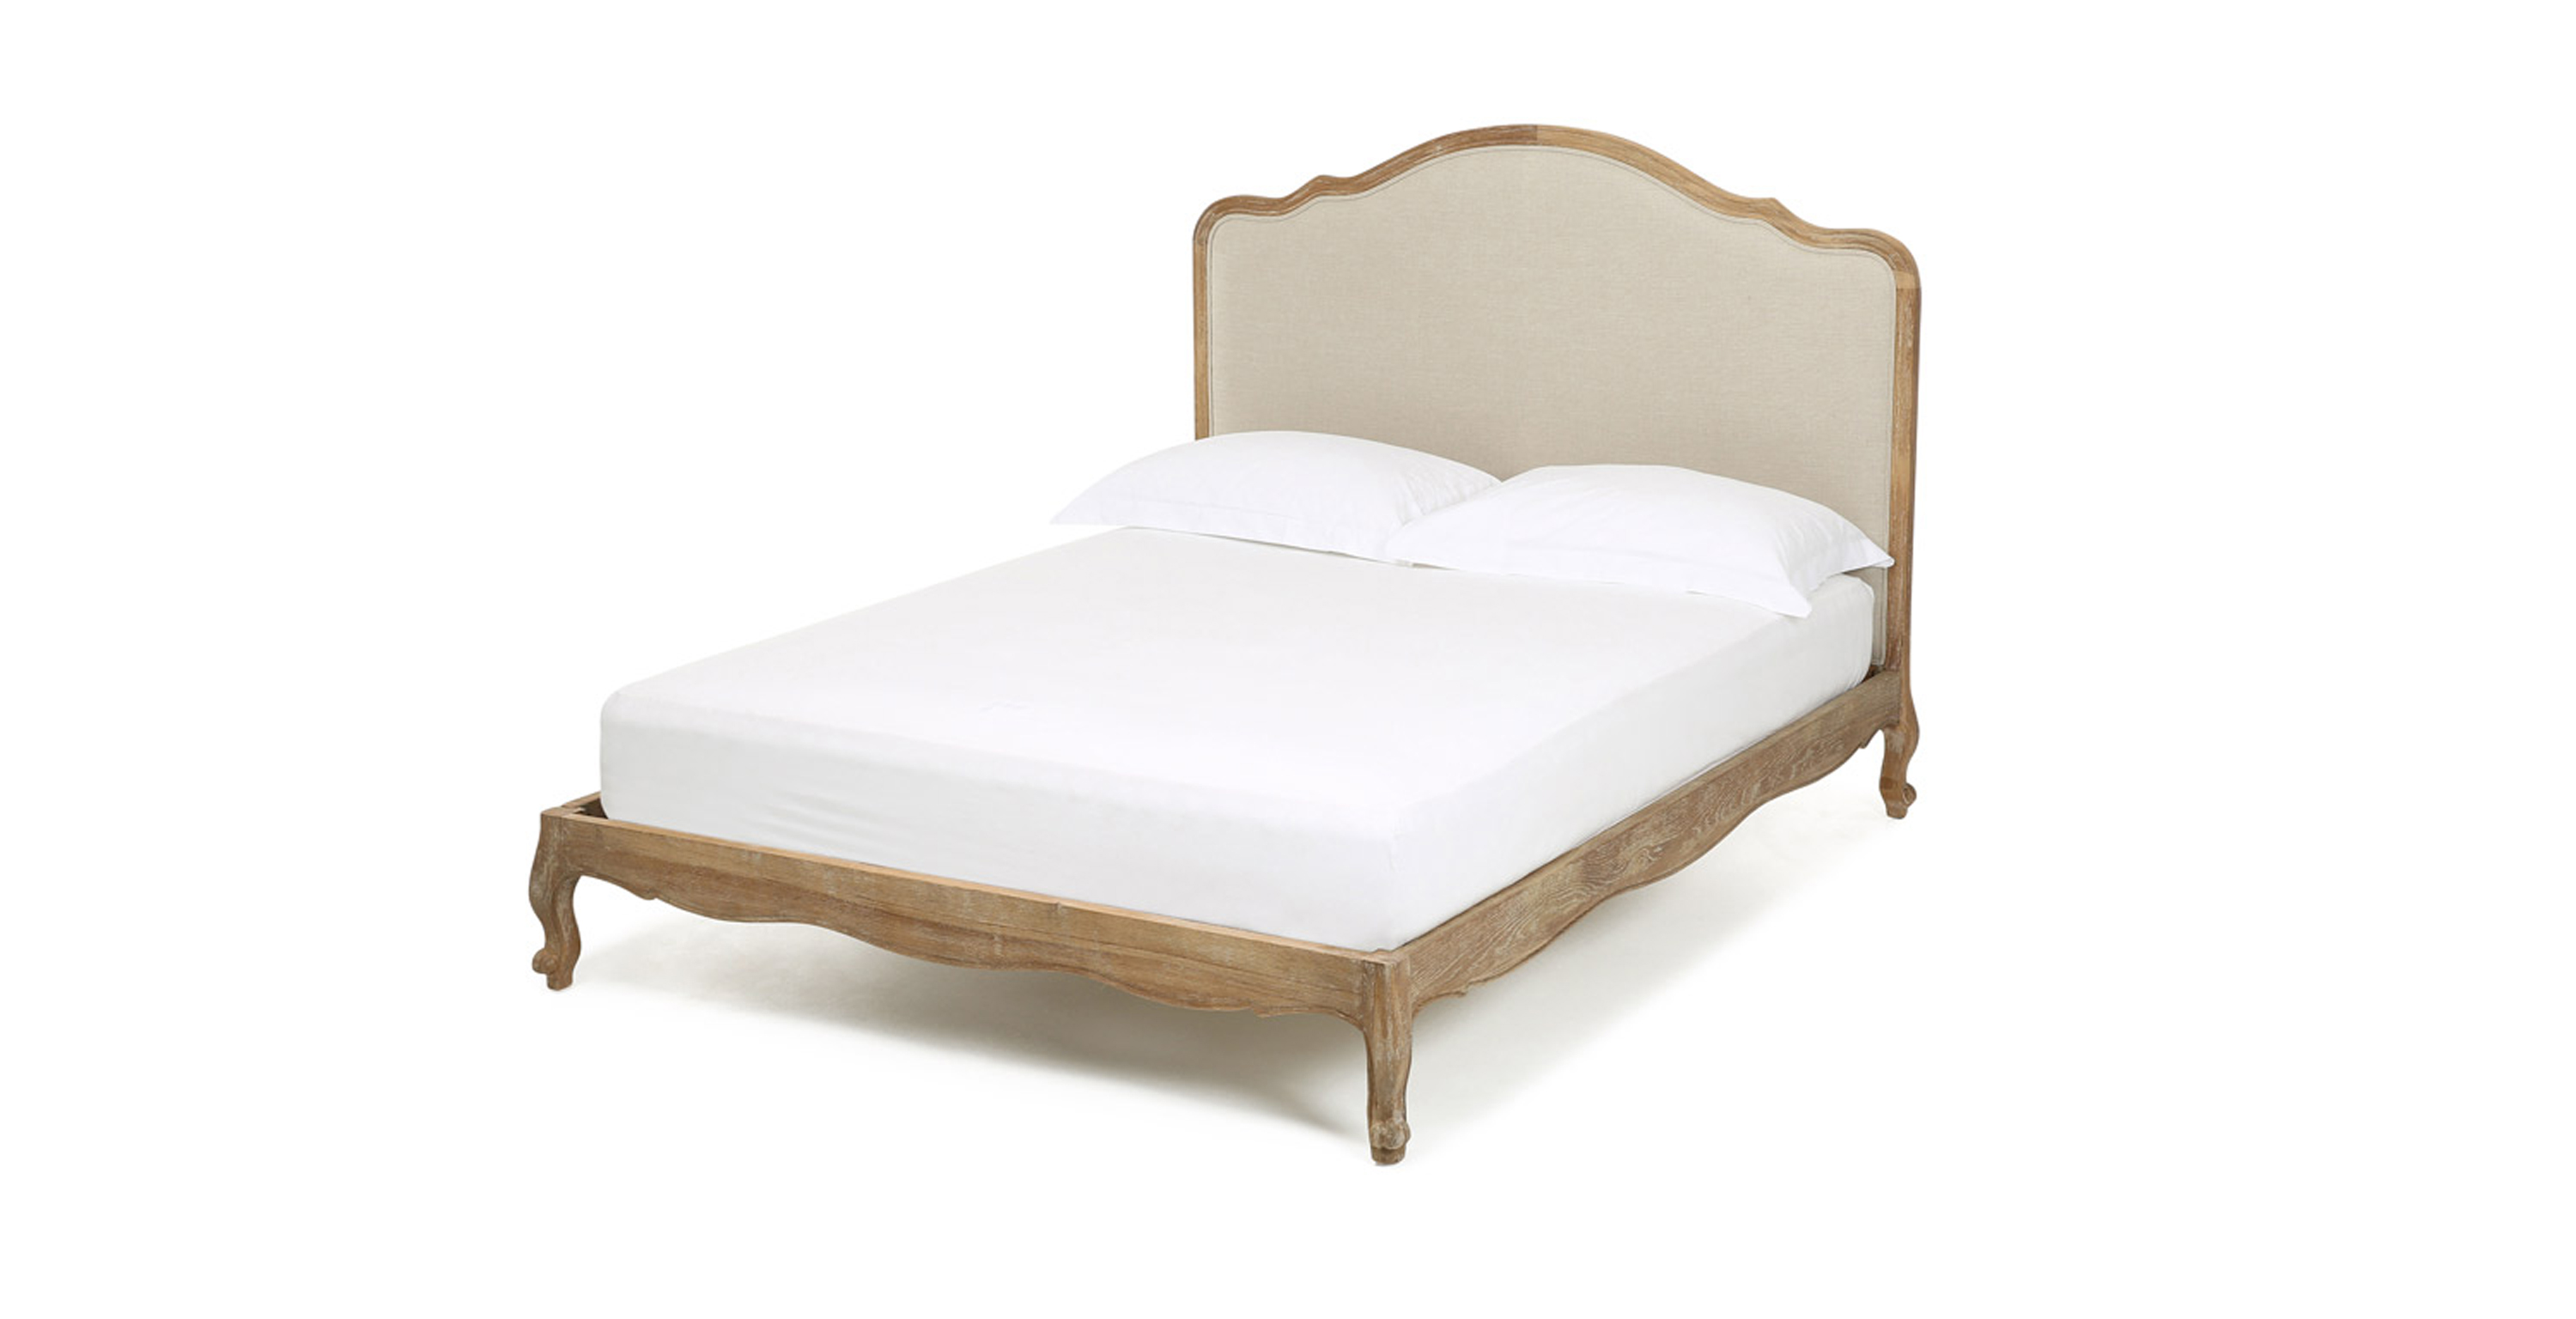 Sienna Bed Double King Super, French Style Headboards King Size Beds